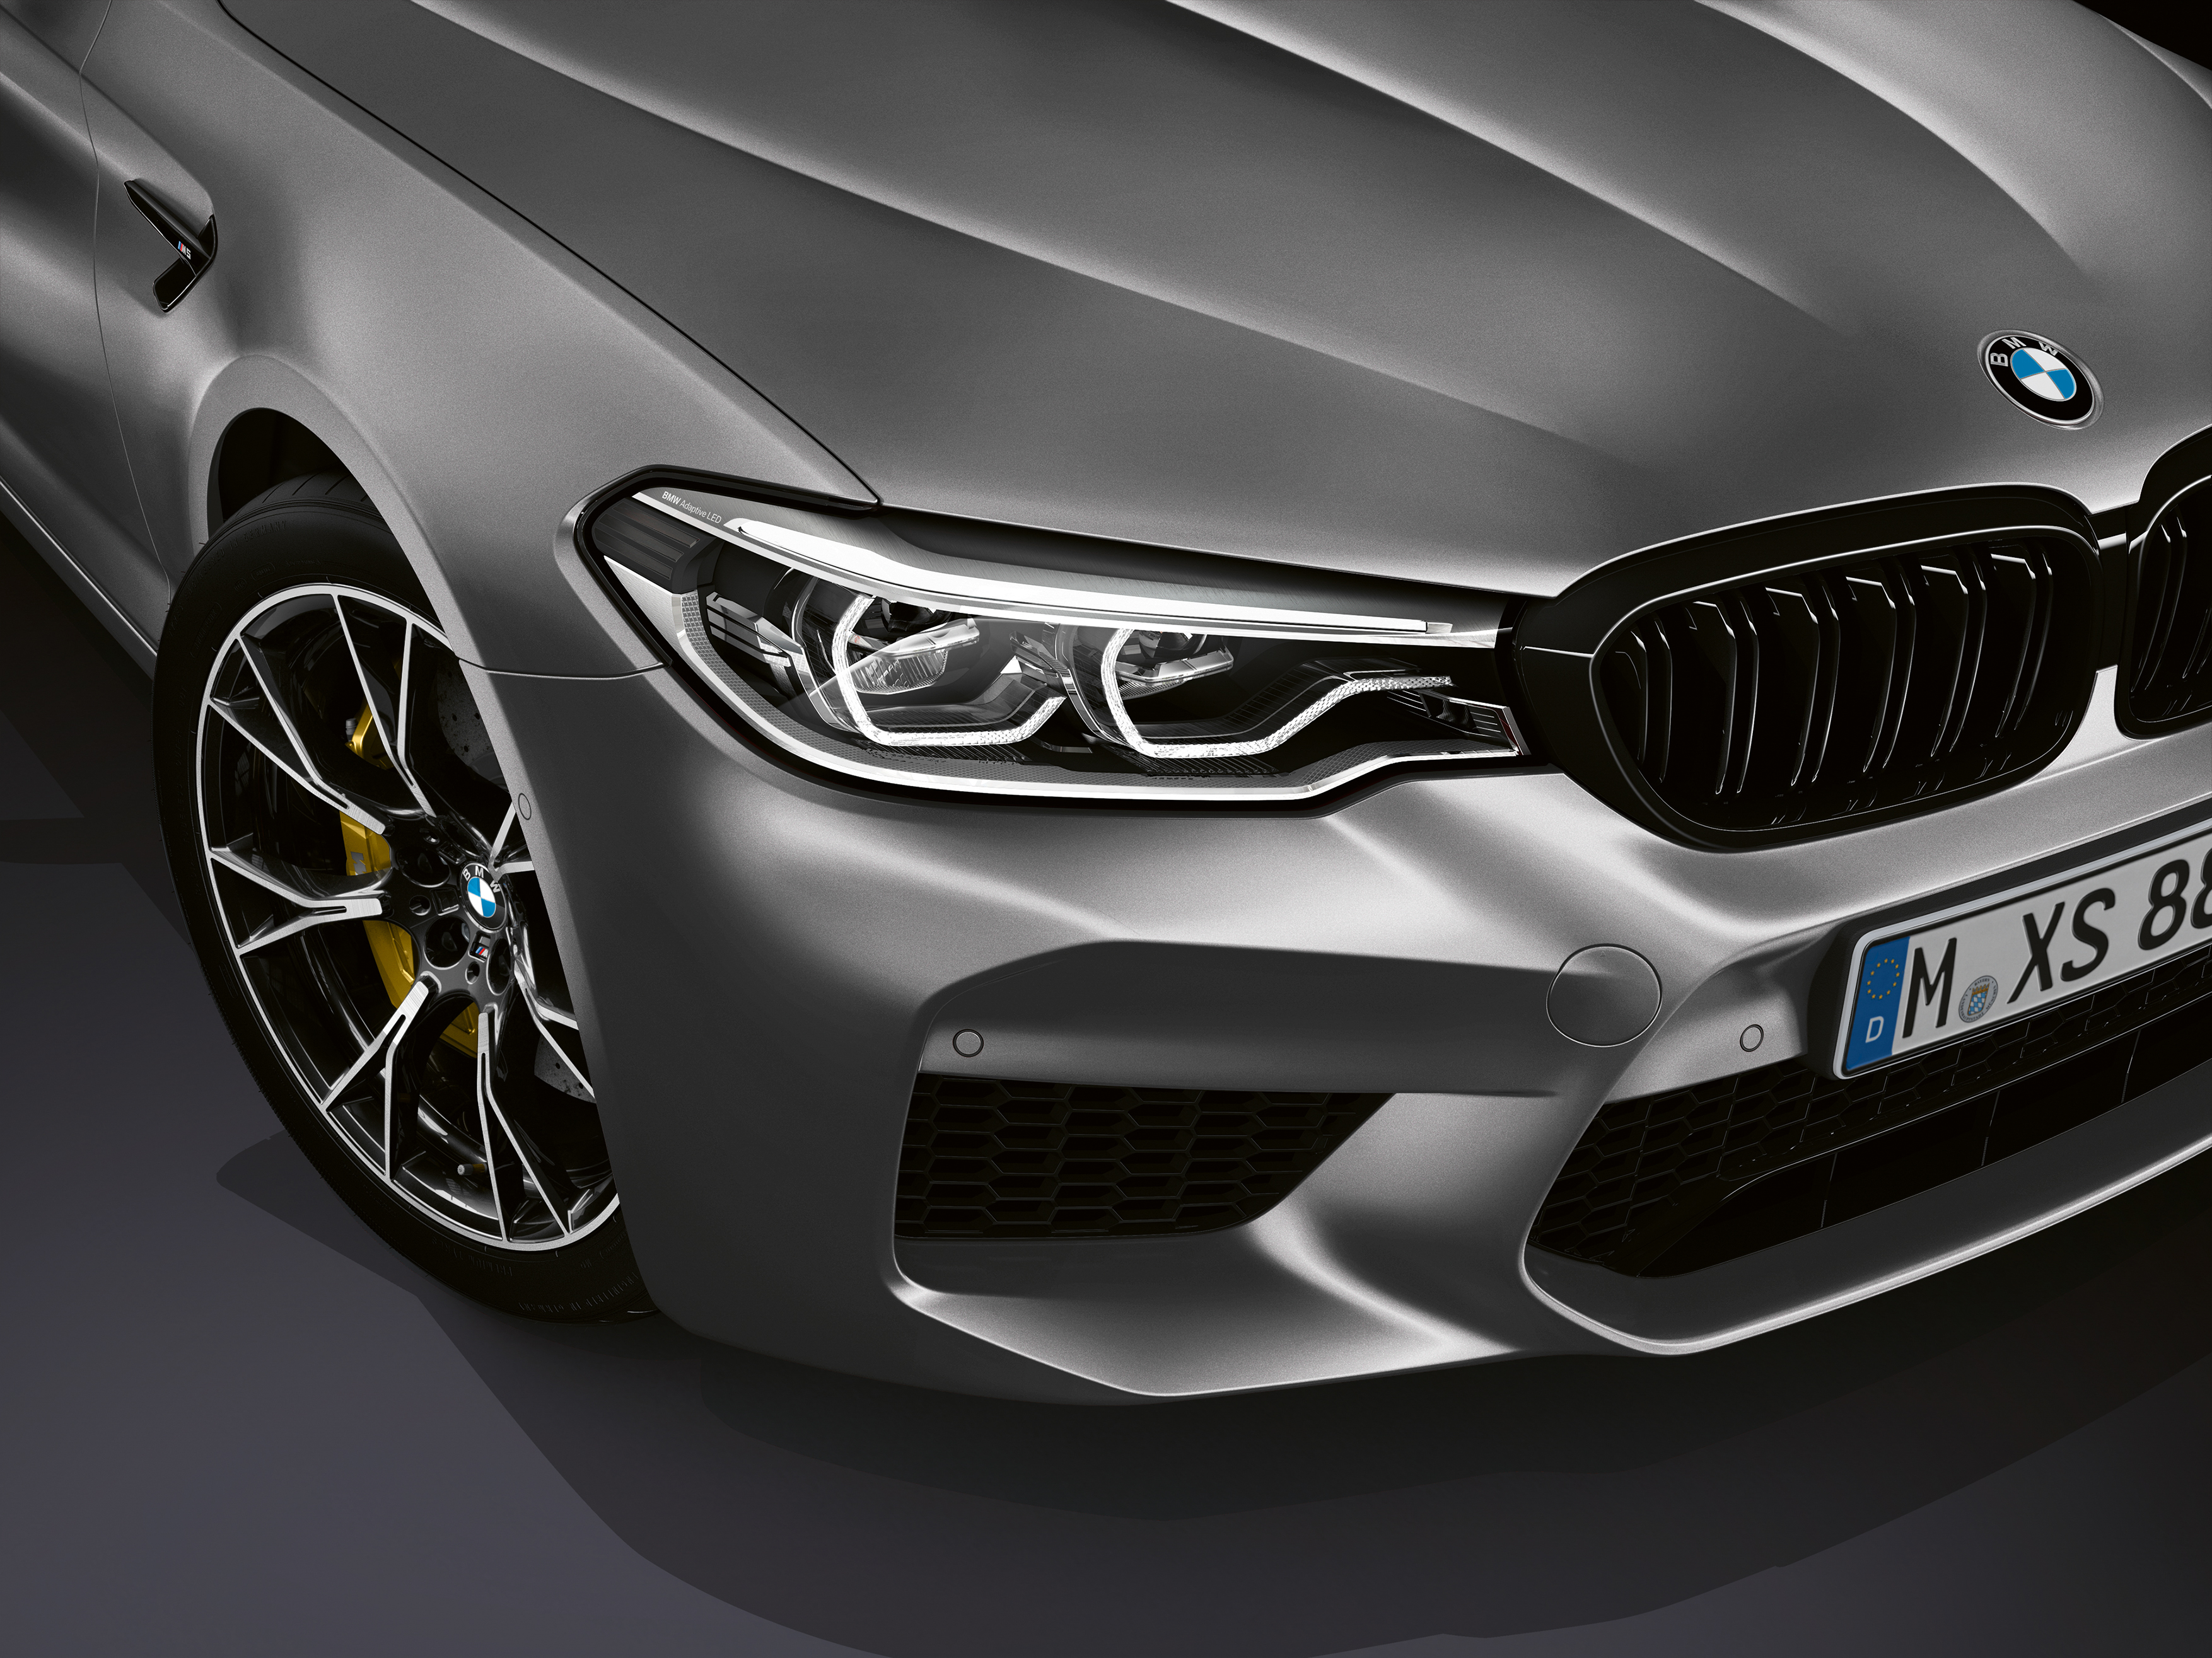 M 5 f 90 competition. BMW m5 f90 Competition. BMW m5 f90 Competition 2018. BMW m5 f90 Competition 2019. BMW m5 f90 Competition Restyling.